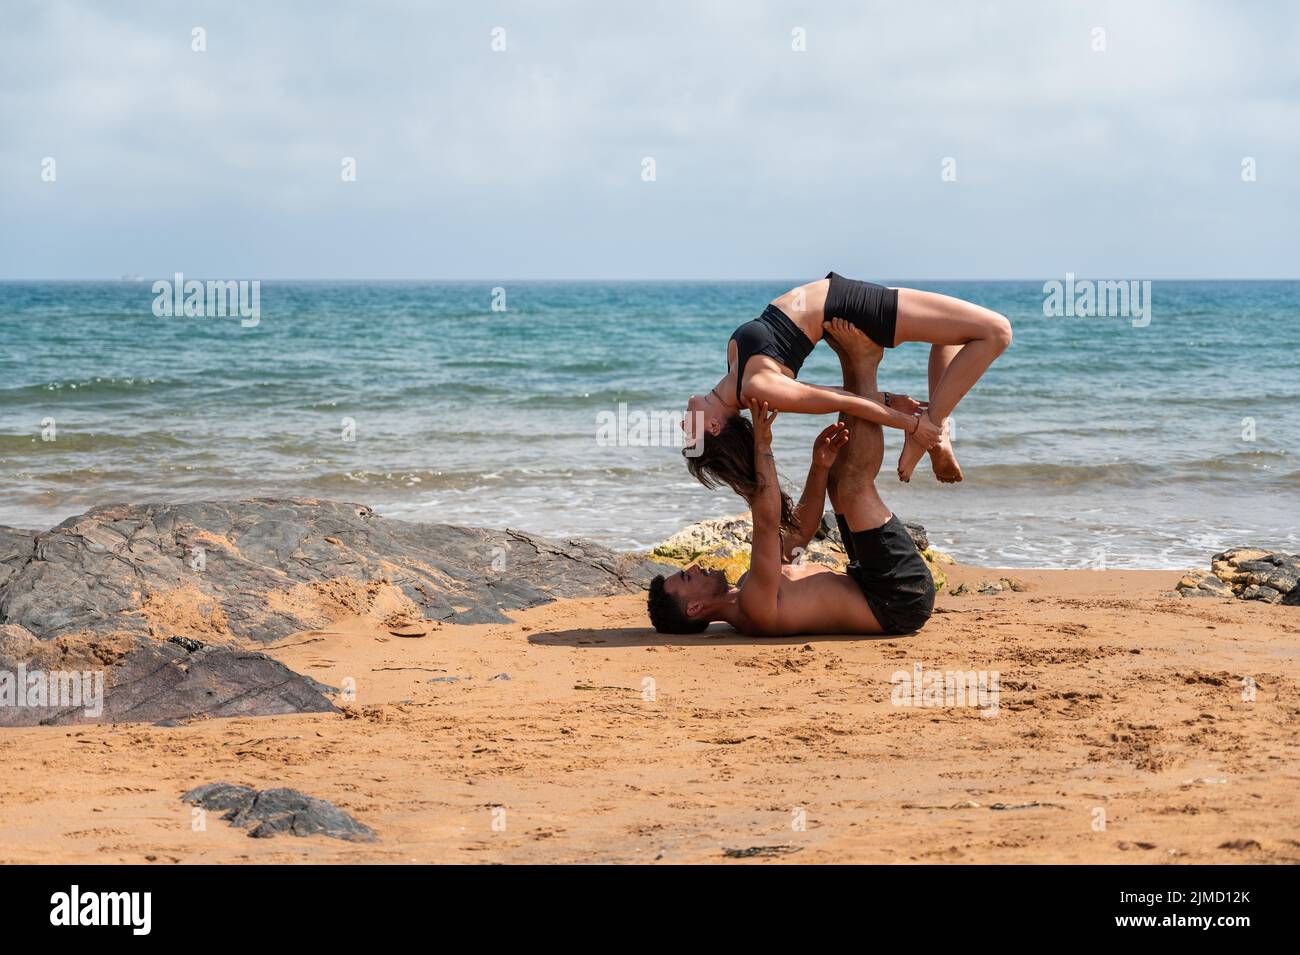 Side view of woman in black activewear lying on raised legs of man and stretching back during acro yoga session on sandy beach near waving sea Stock Photo